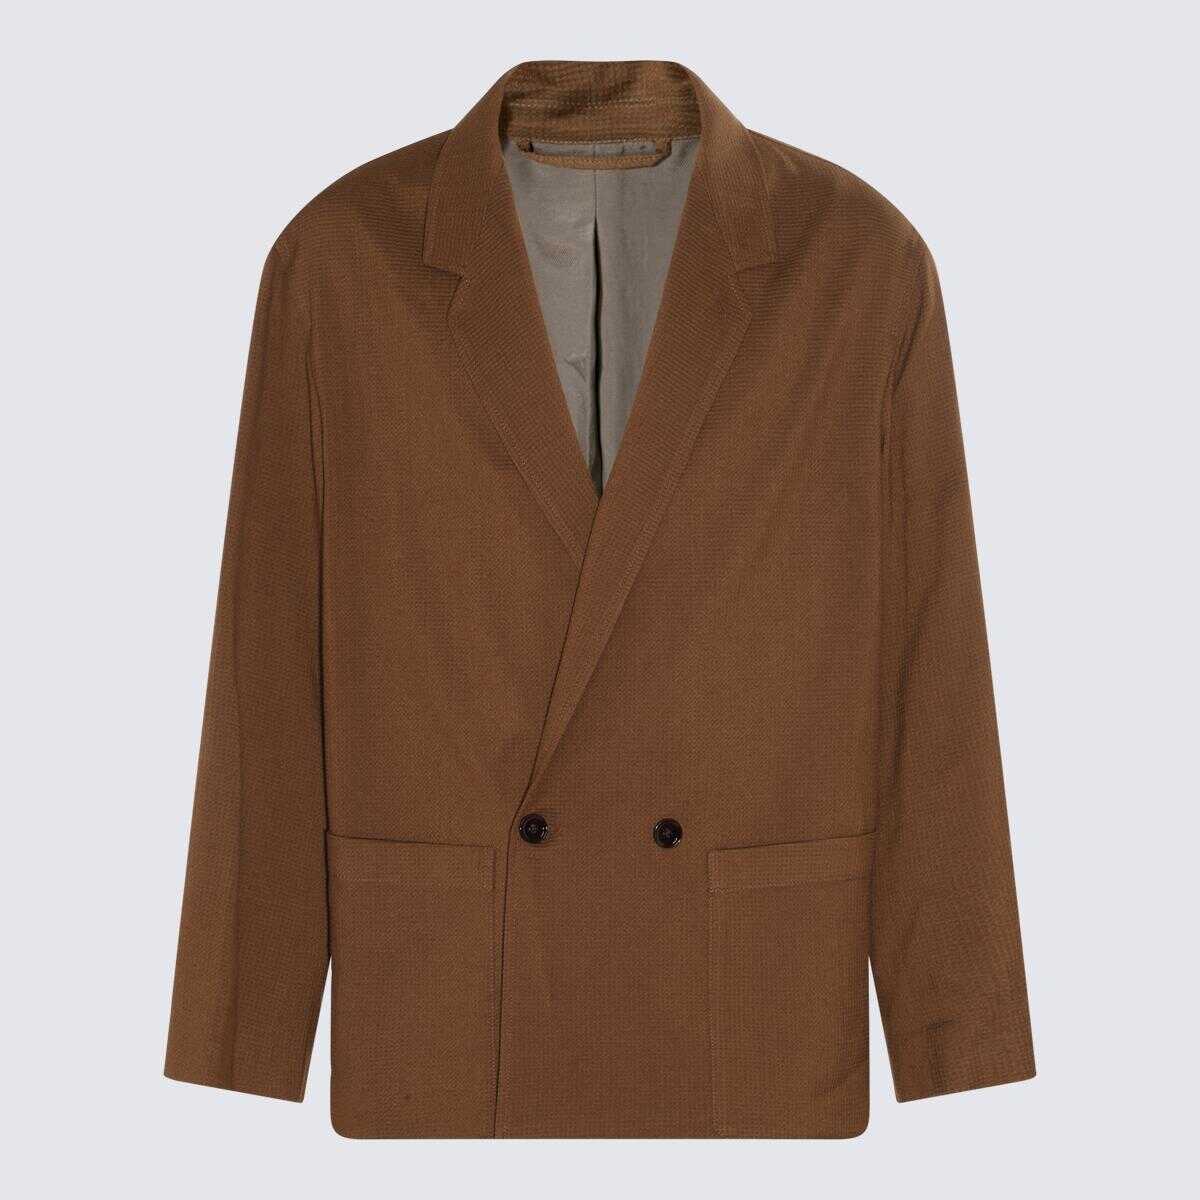 LEMAIRE LEMAIRE TOBACCO BLAZER TOBACCO b-mall.ro